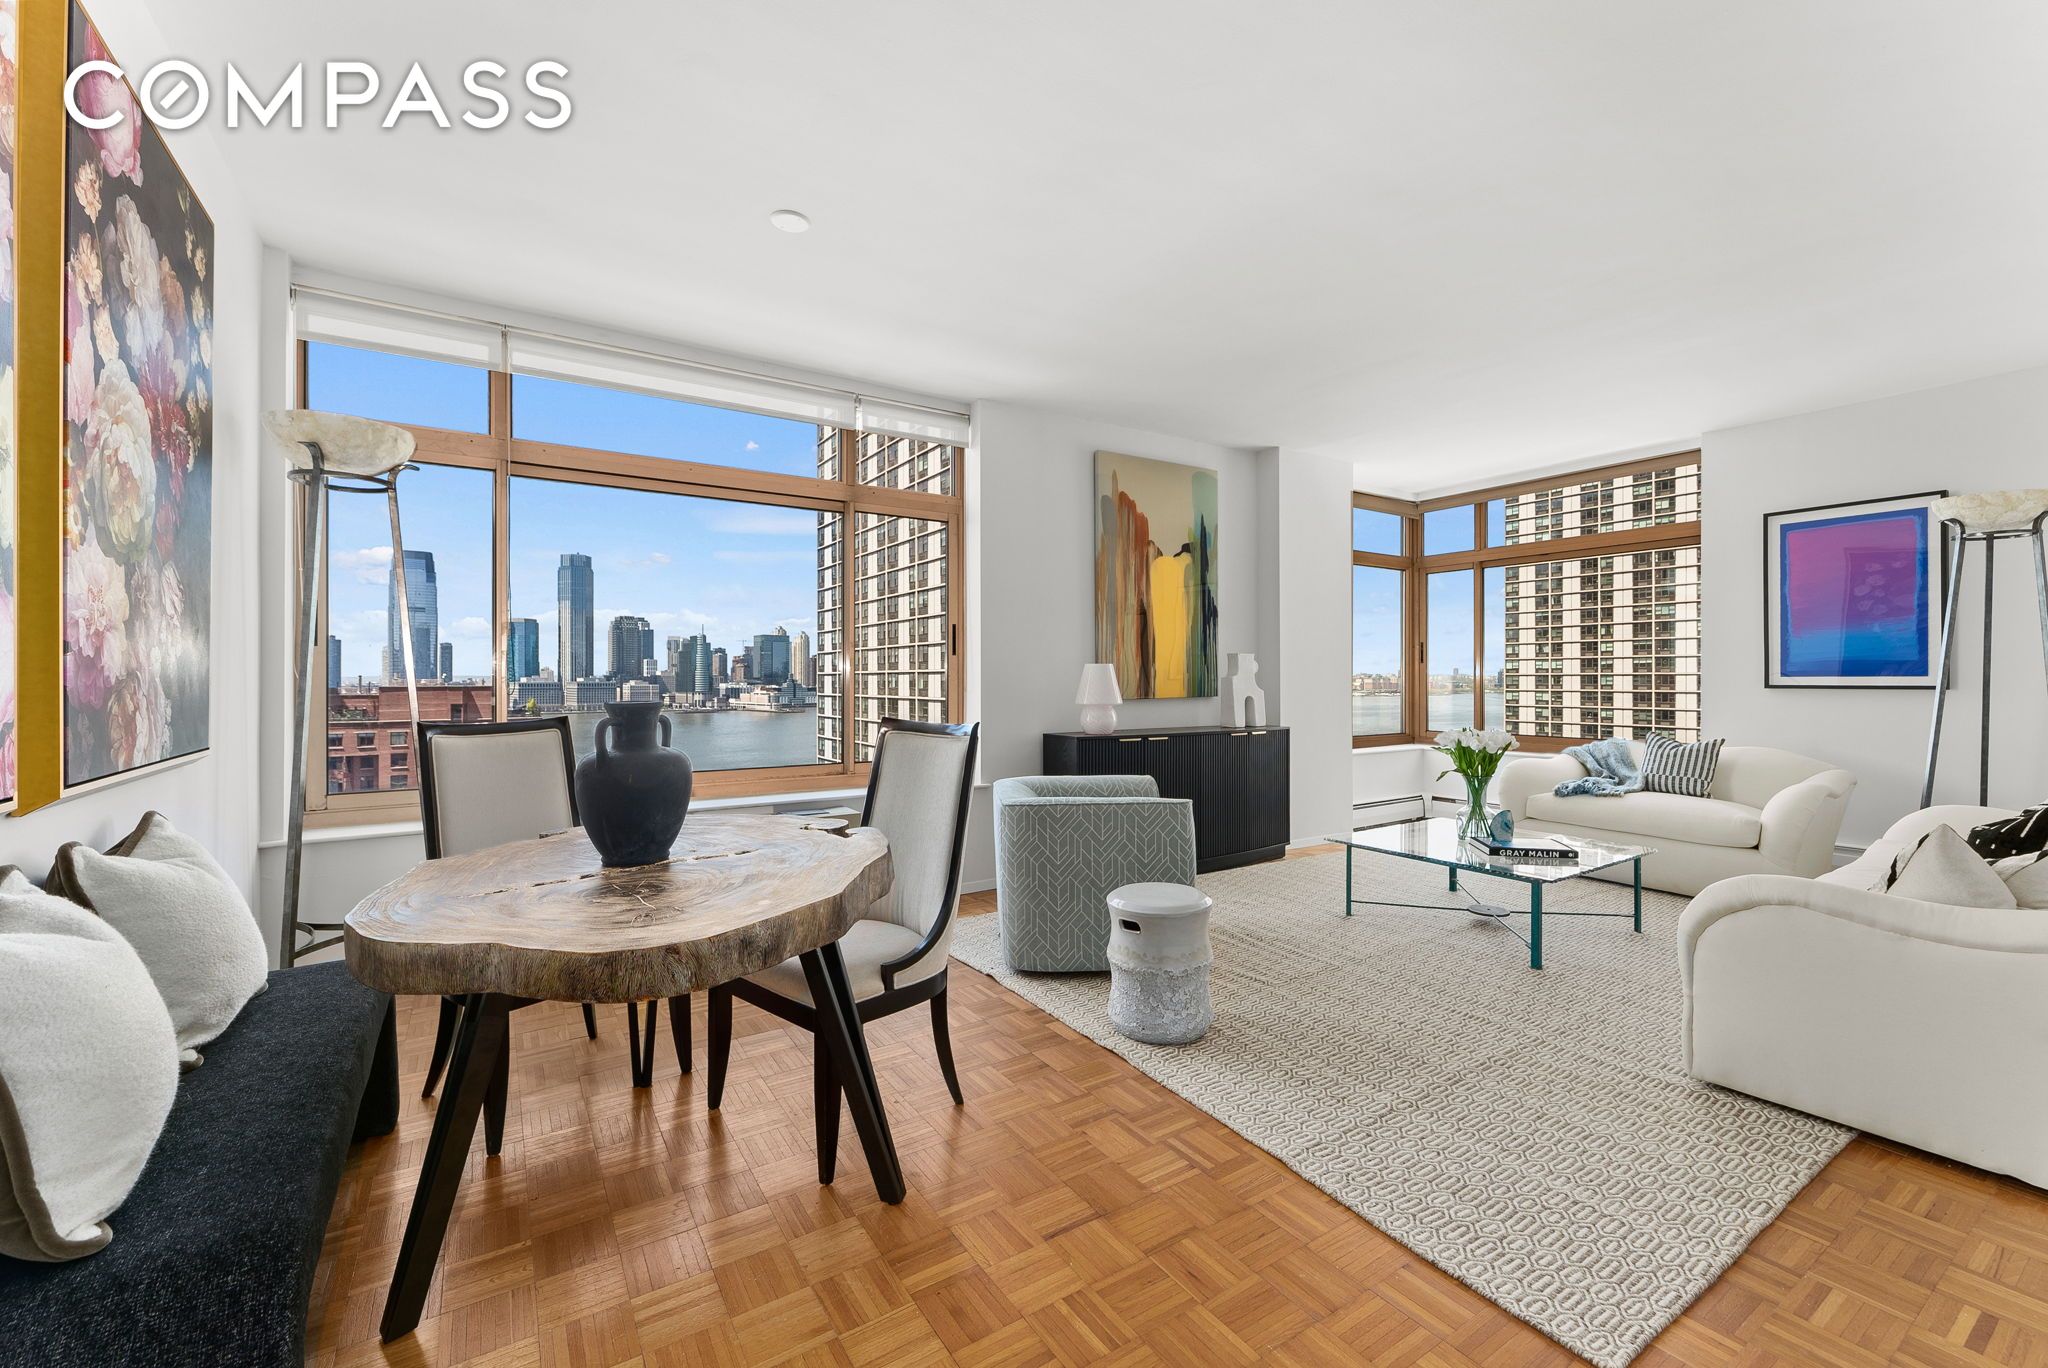 250 South End Avenue Ph1a, Battery Park City, Downtown, NYC - 2 Bedrooms  
2 Bathrooms  
4 Rooms - 